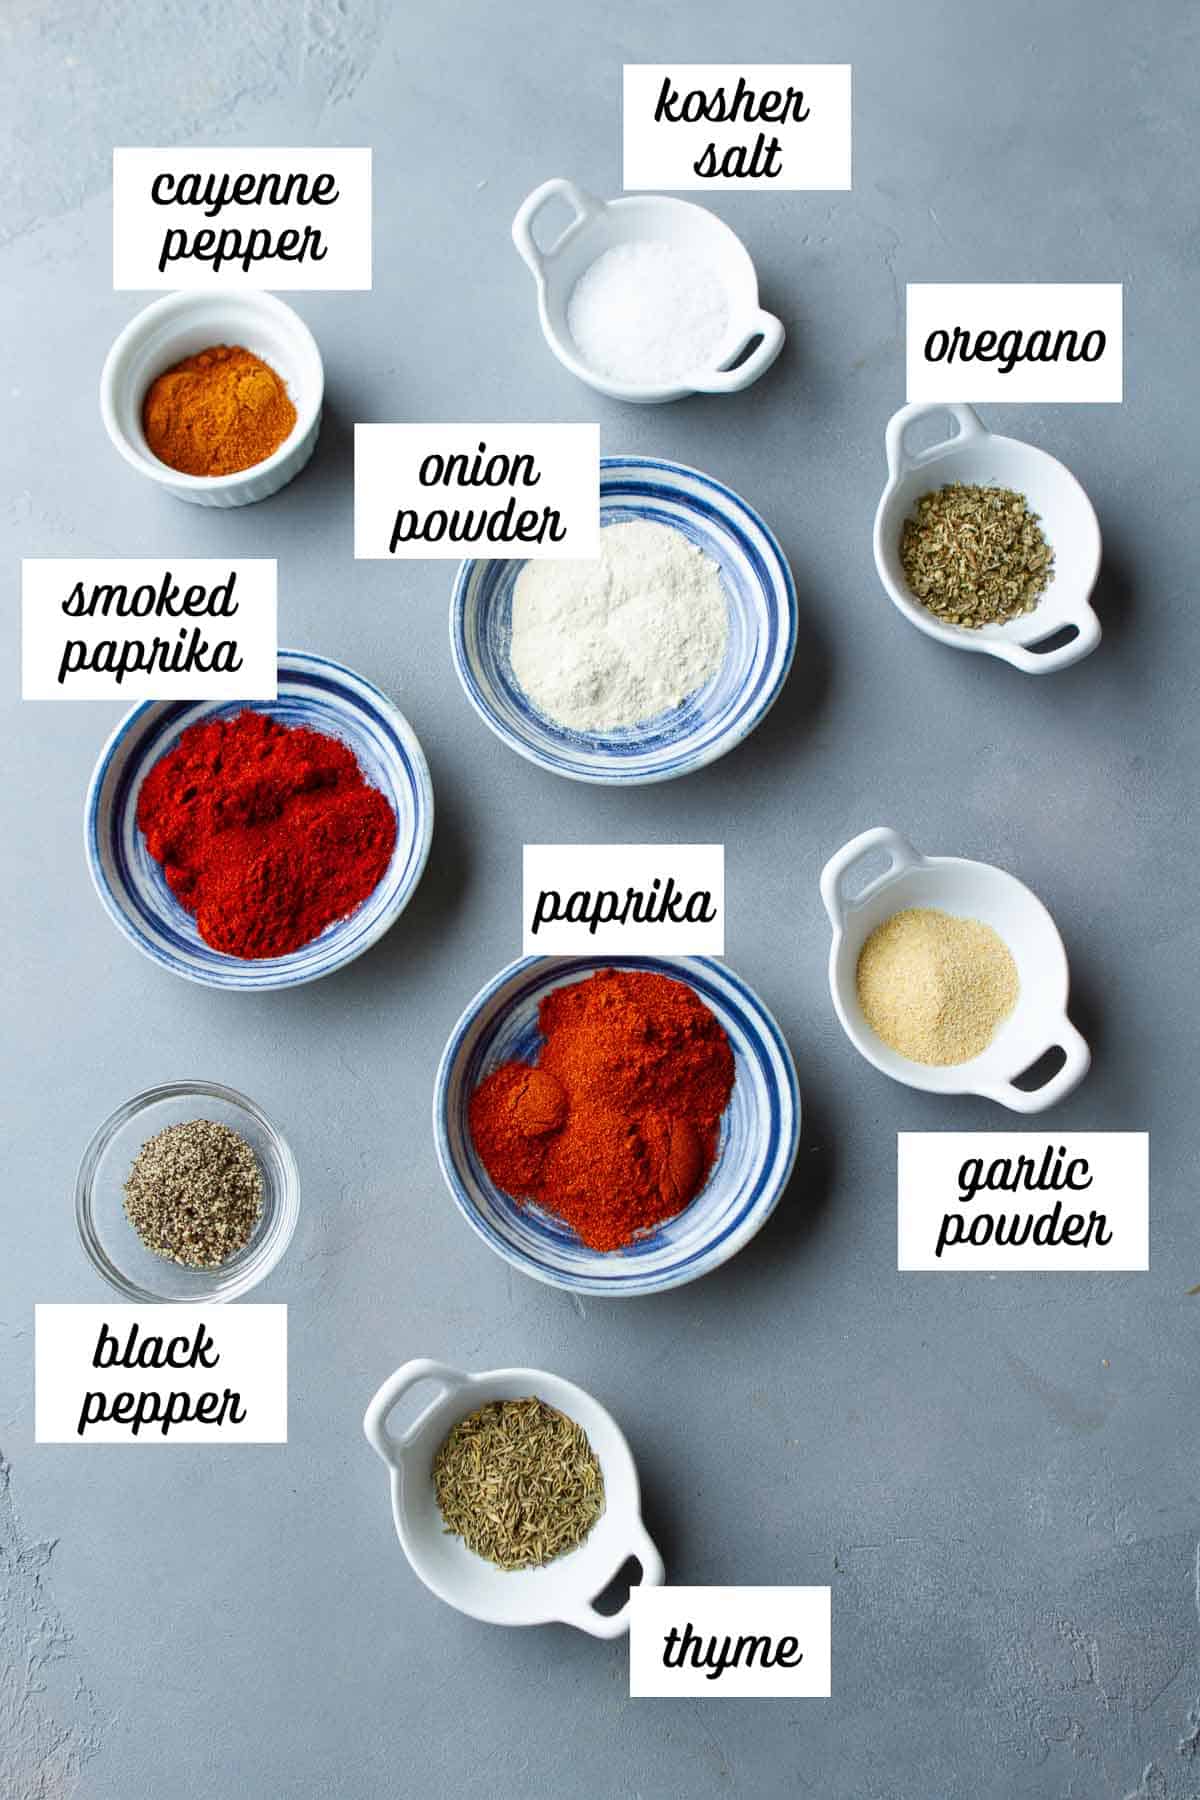 Labeled ingredients for blackening seasoning in various small bowls.